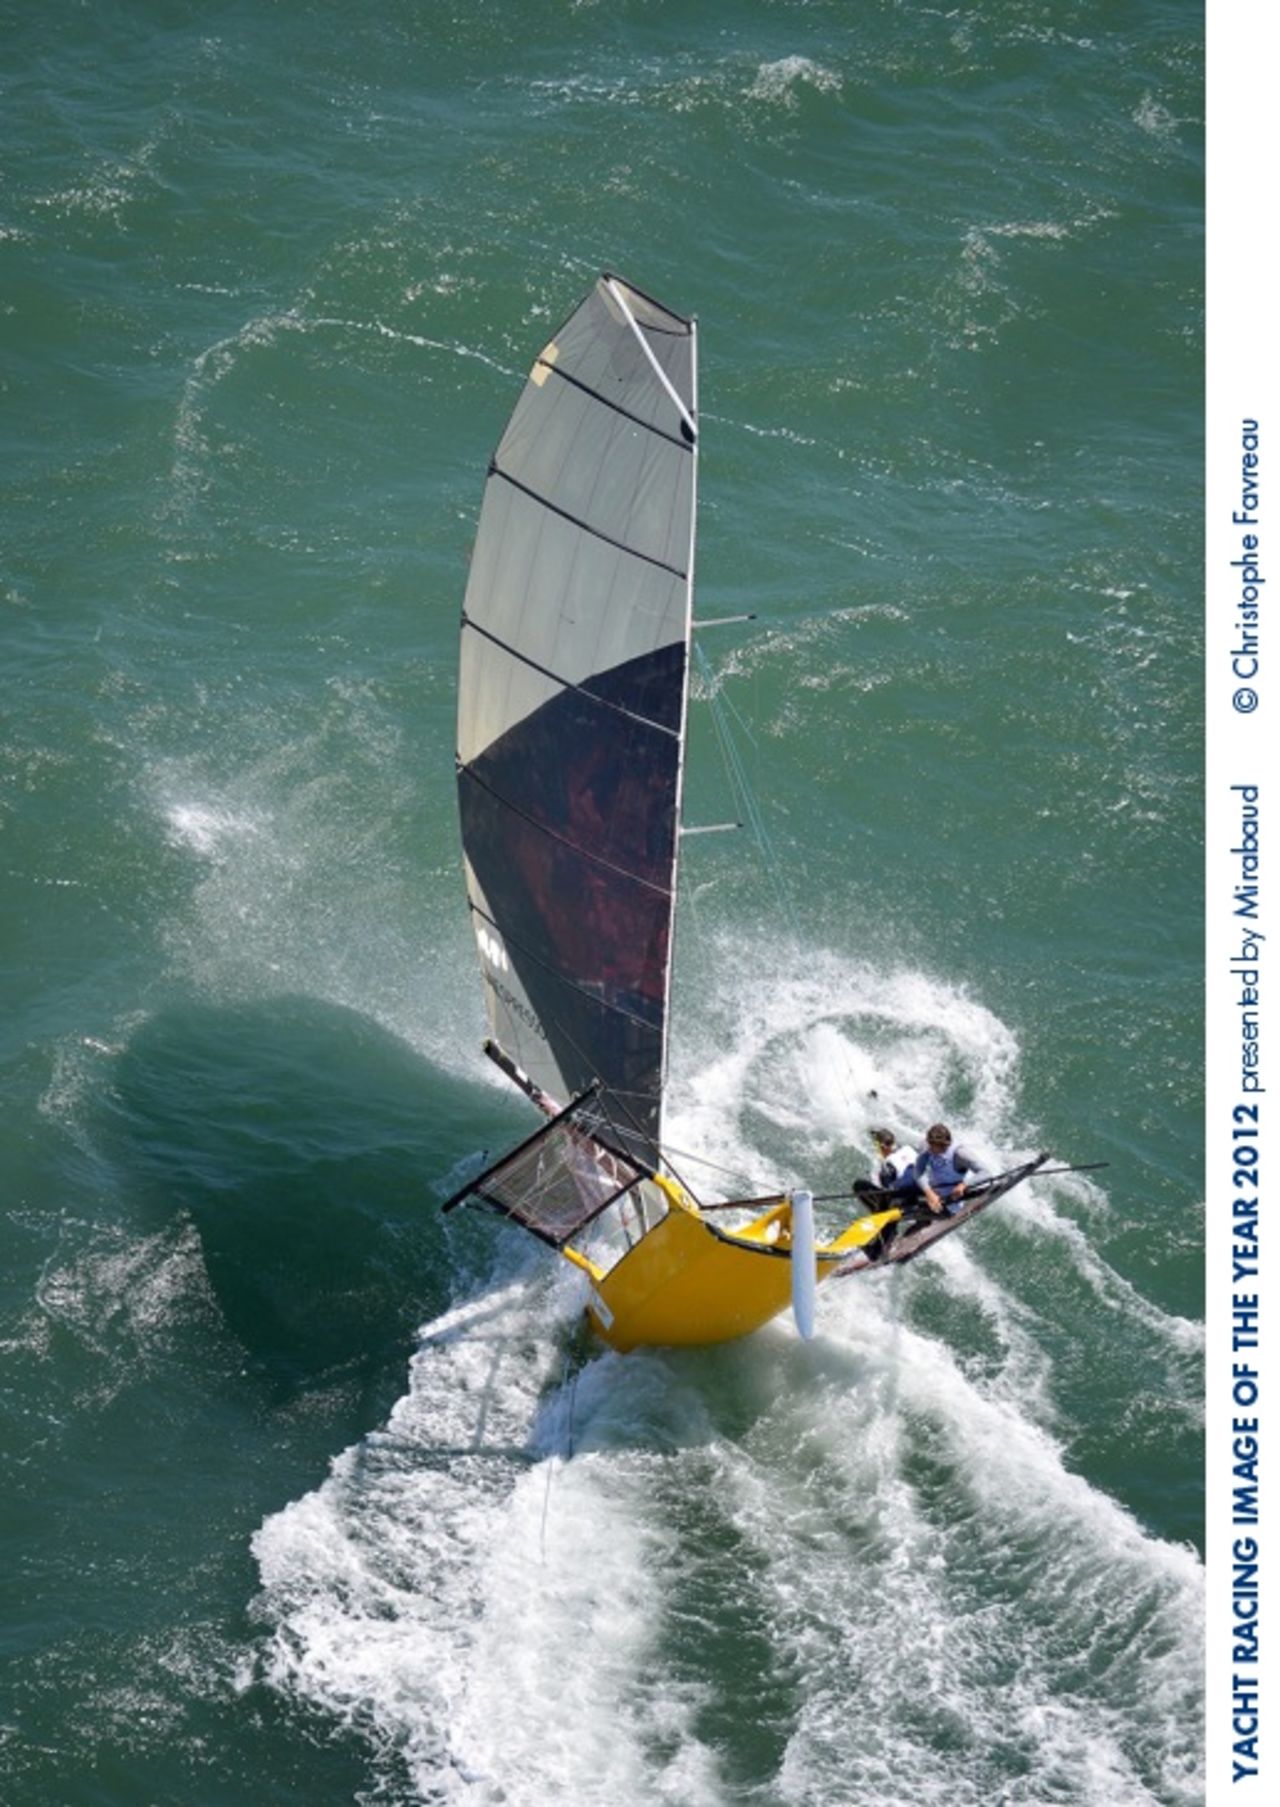 Photographer Christophe Favreau said Arrigo's winning photo would have been impossible to capture with slow film cameras 20 years ago. Favreau's own submission was of a toubled skiff during the Expresso International Regatta.